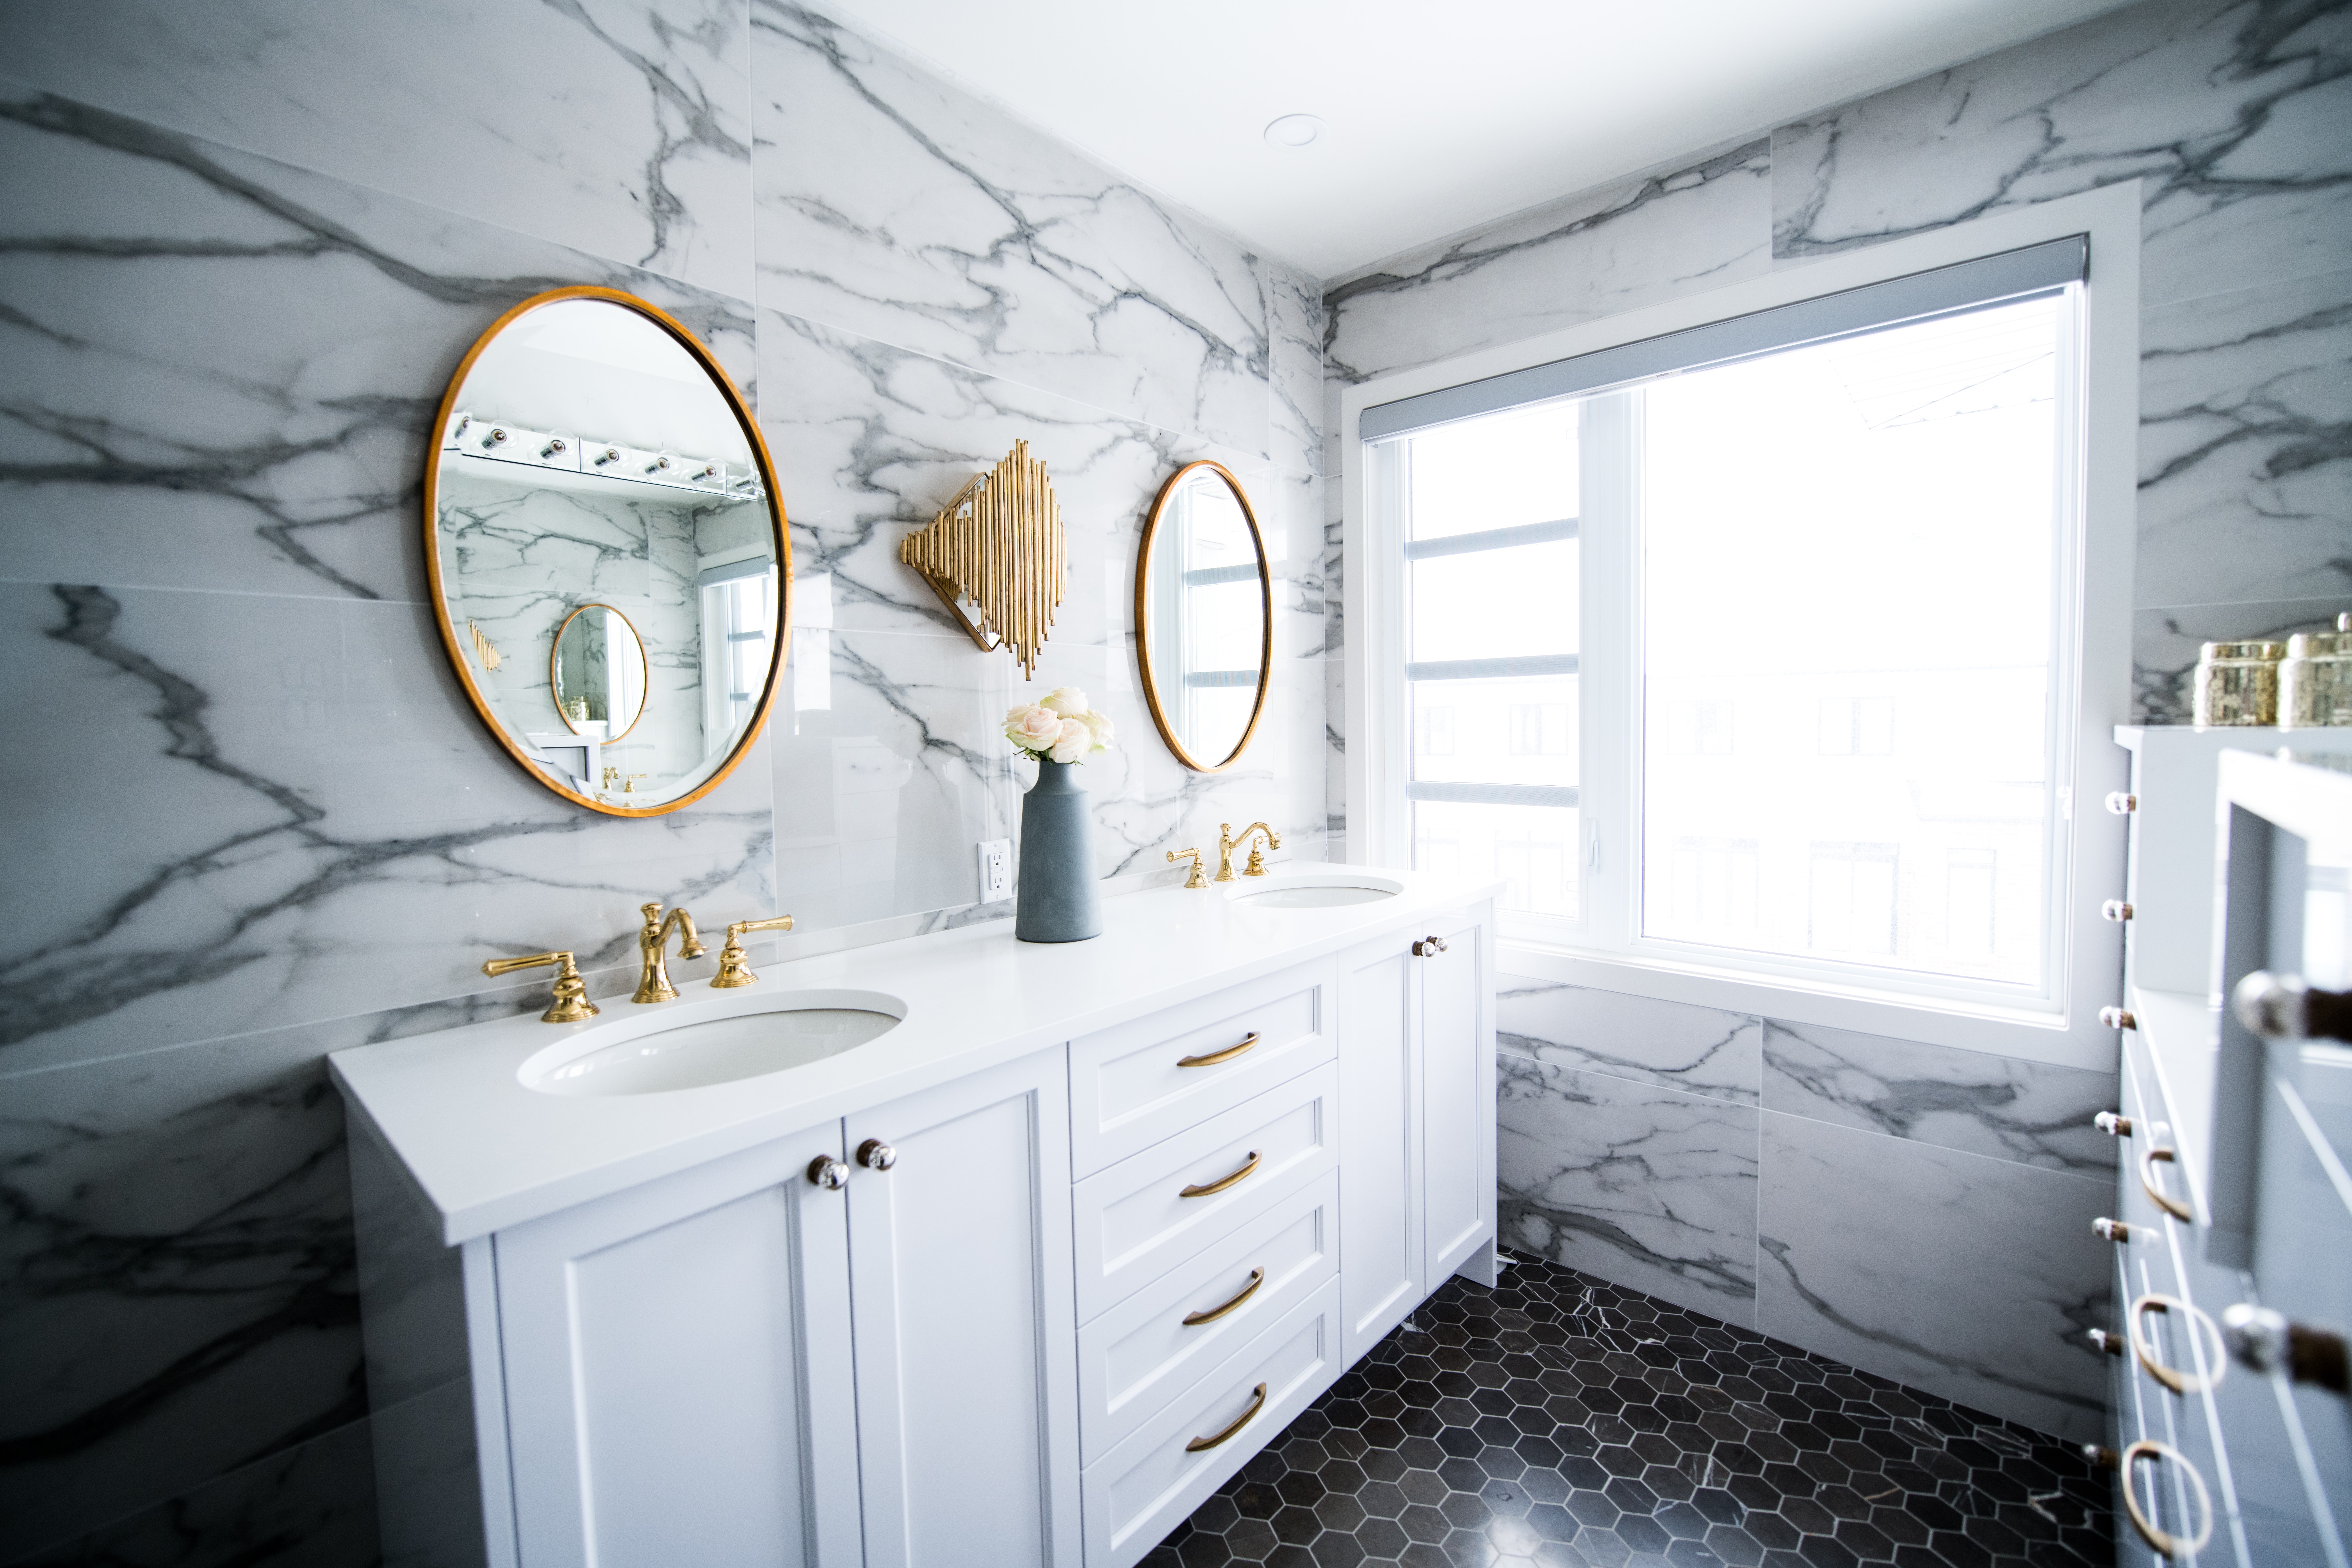 Bright bathroom remodel with white marble, gold accents, two sinks and two mirrors.